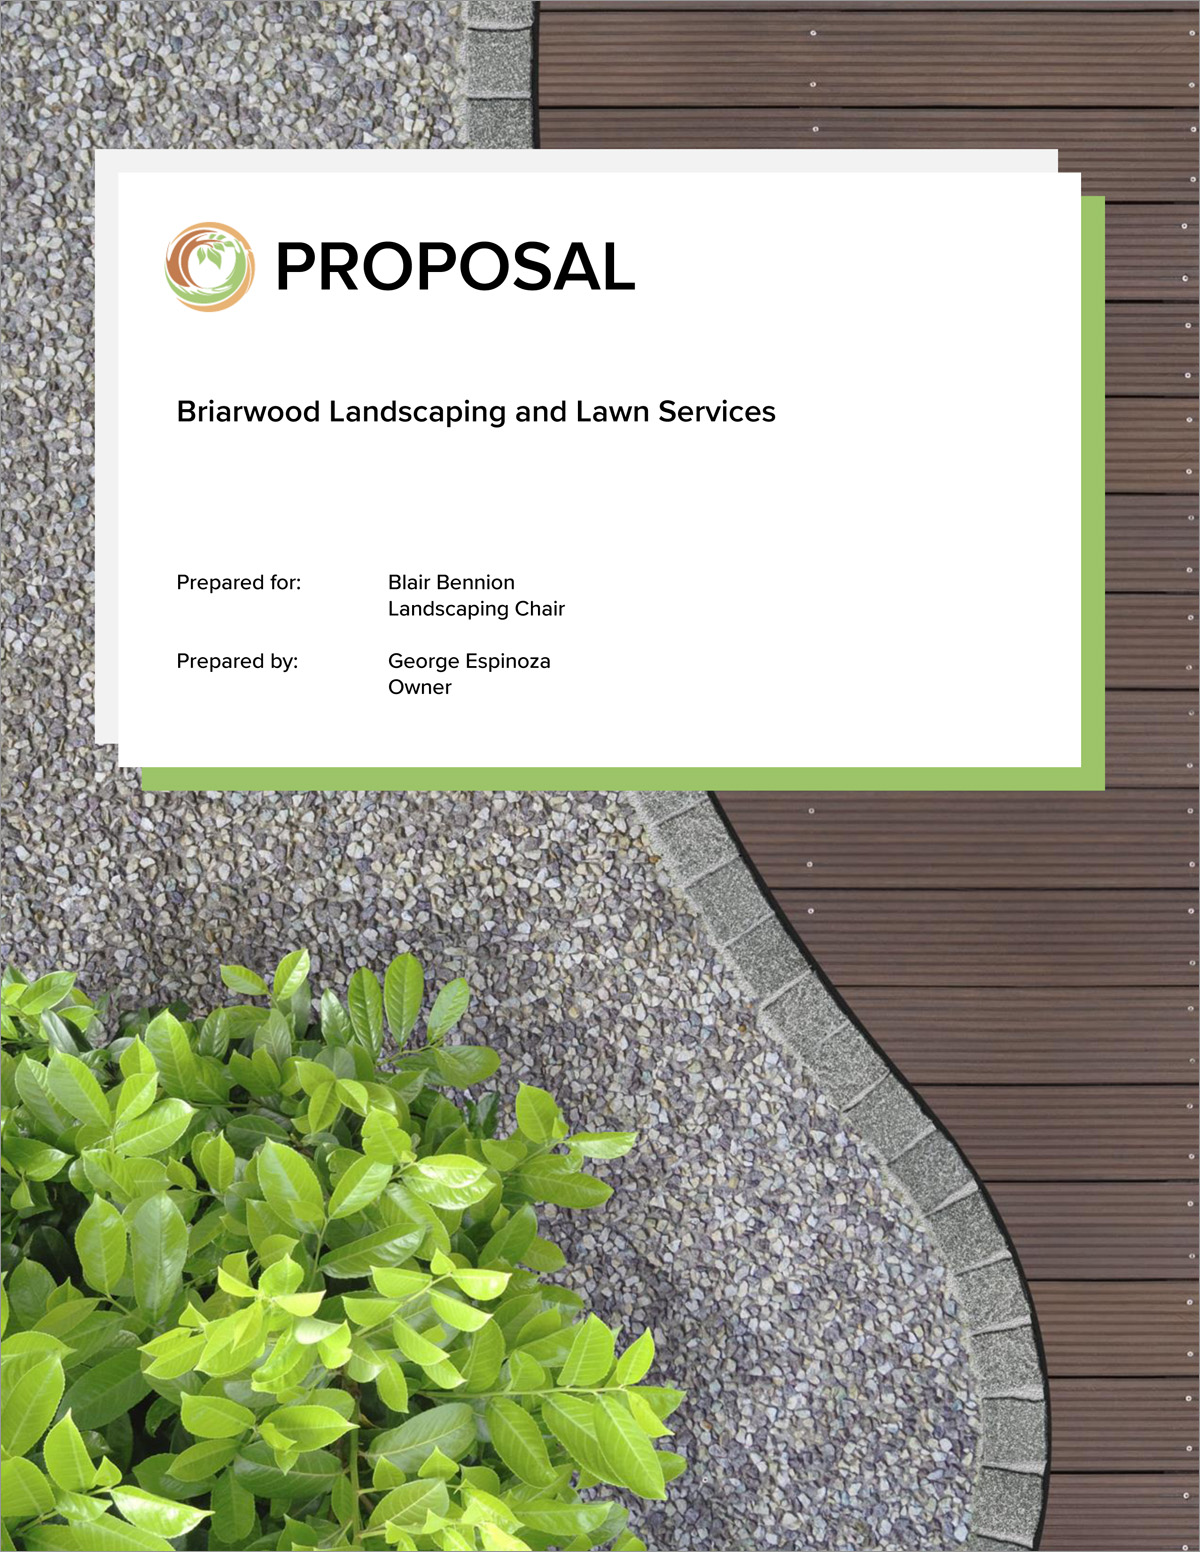 Lawn Care And Landscaping Services, Lawn Care And Landscaping Services Proposal